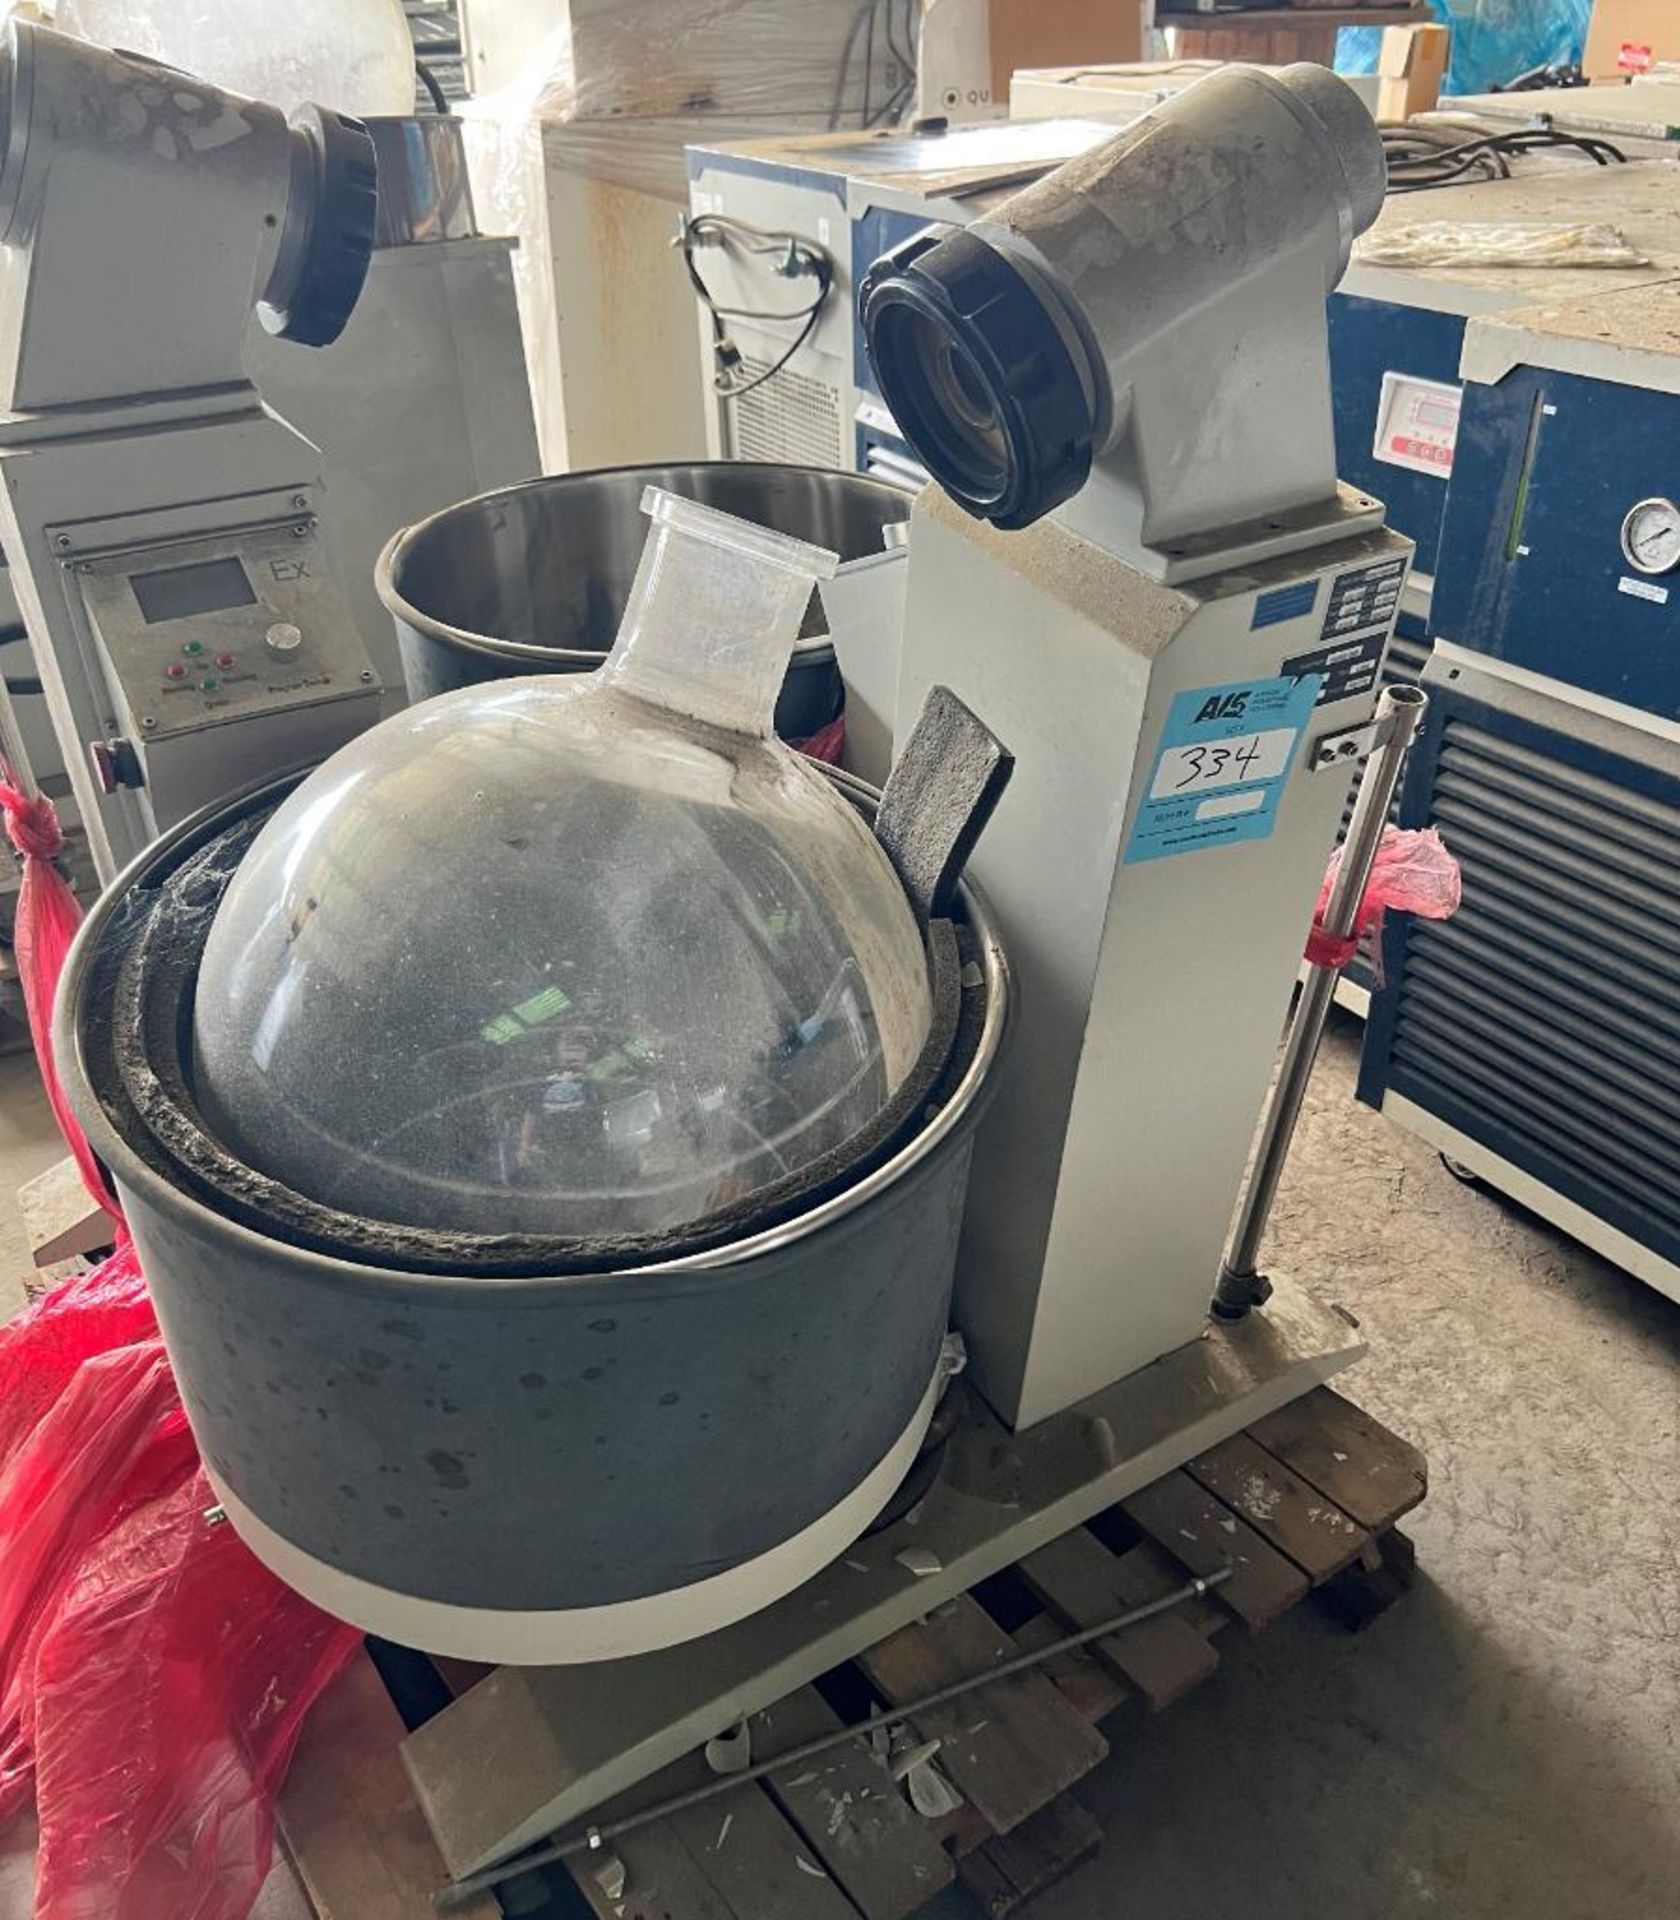 NanBel Rotary Evaporator, Model NRE-1050, Serial# 18061718, Built 06/2018. With miscellaneous glass.